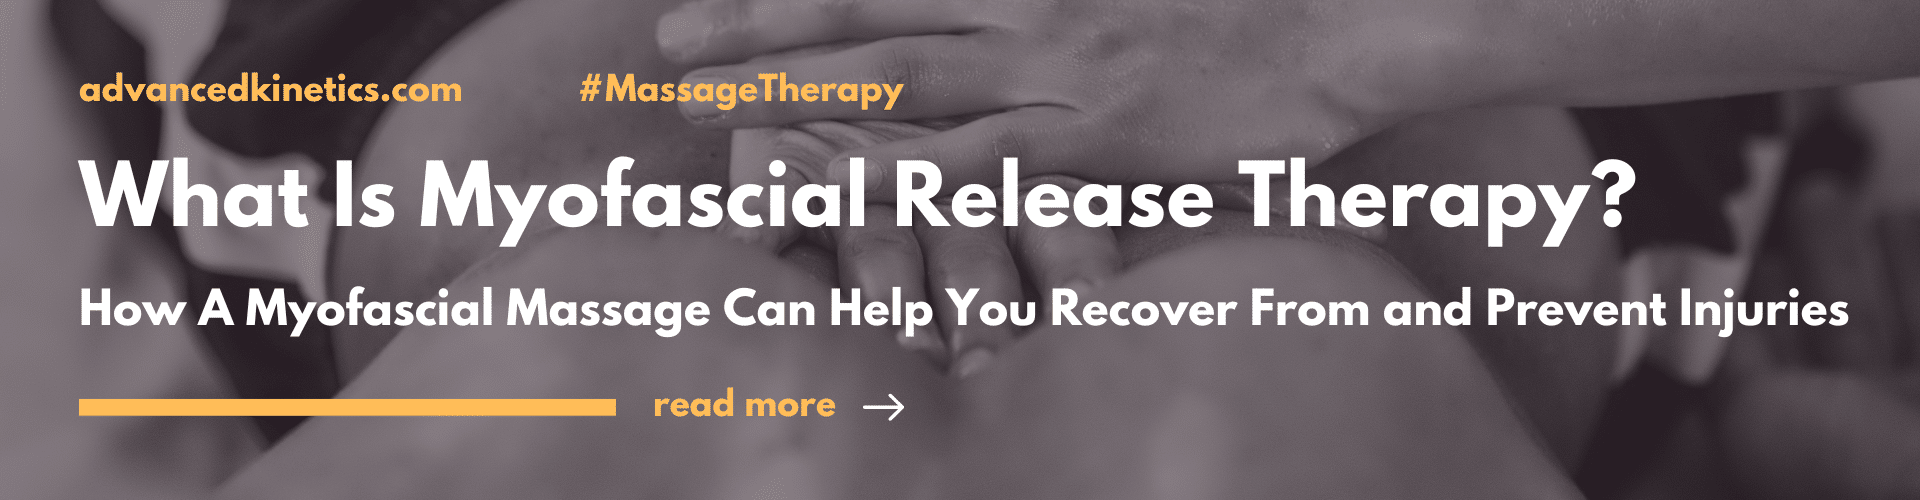 What Is Myofascial Release Therapy? How A Myofascial Massage Can Help You Recover From and Prevent Injuries